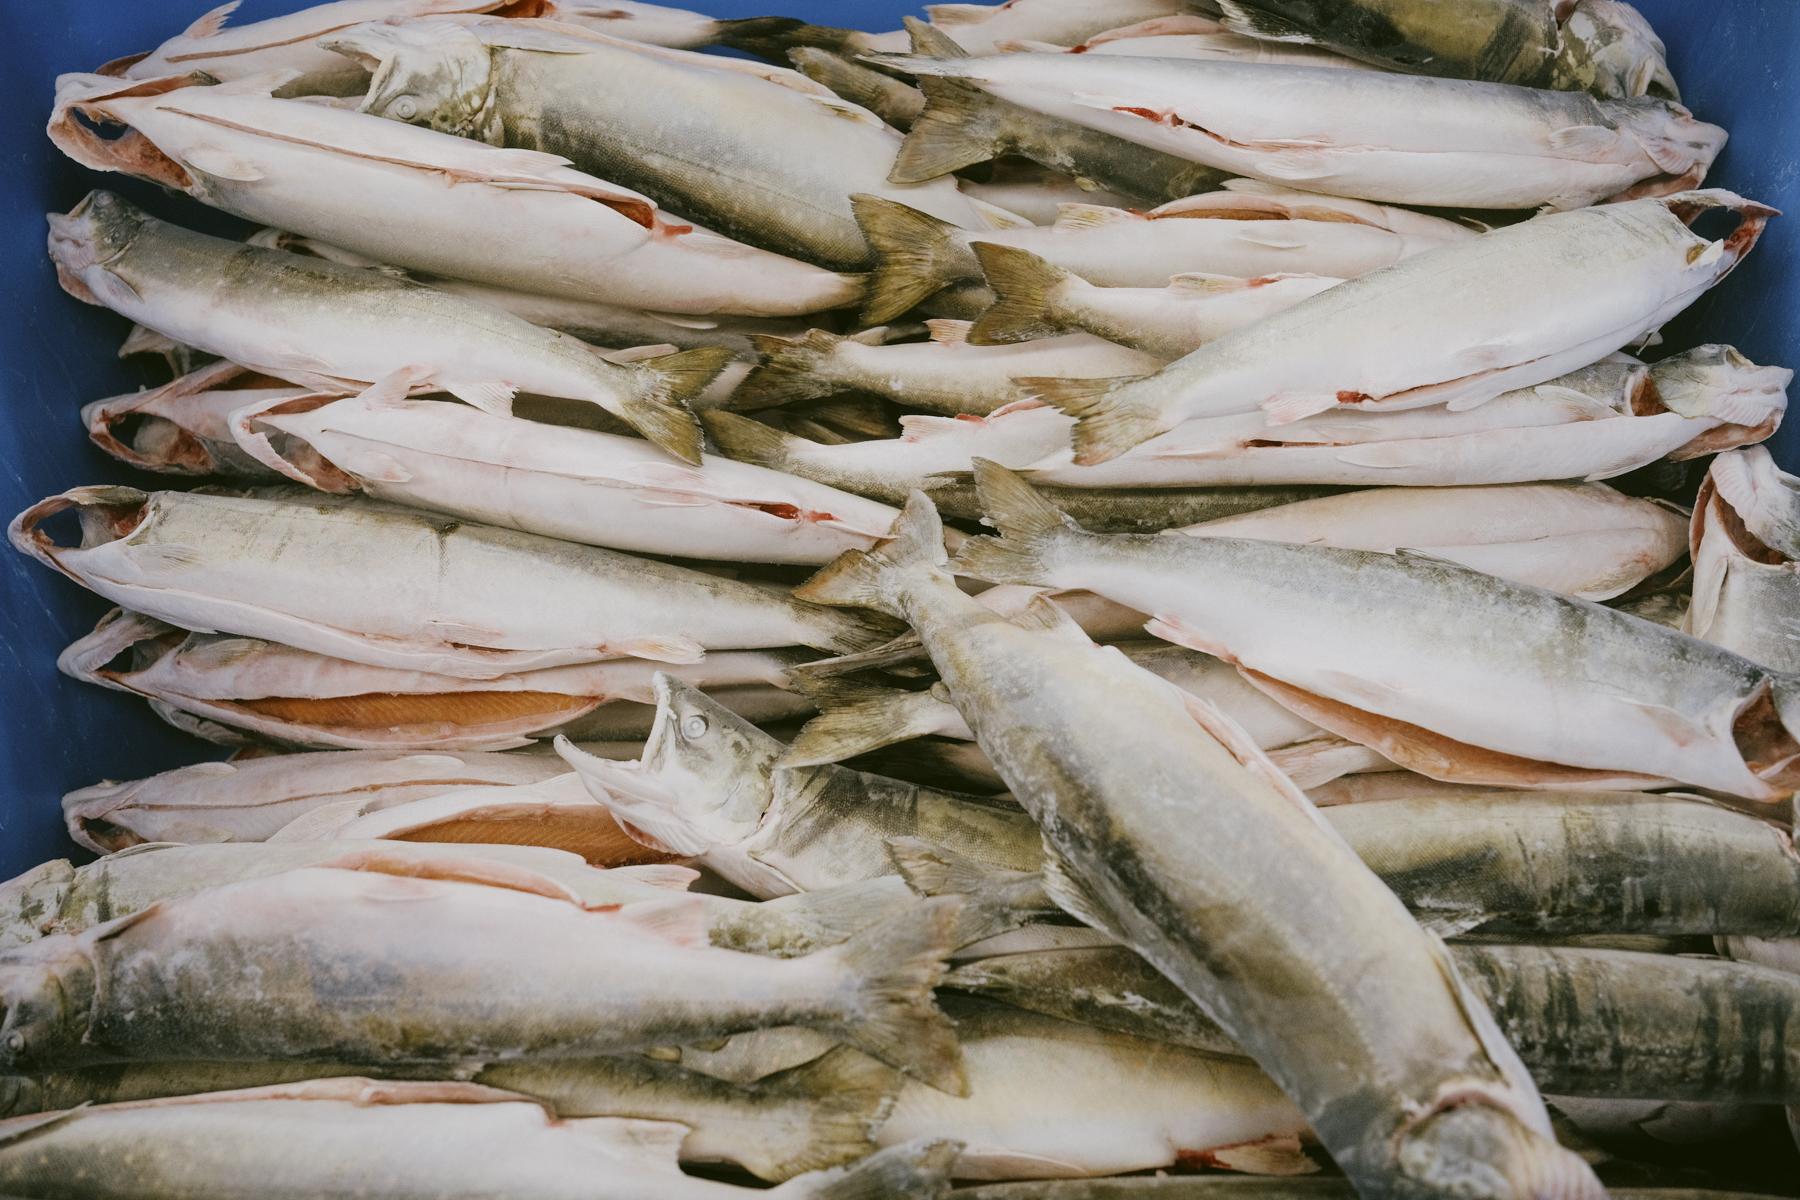 The Hunt for Healthy Food - Arctic char is ready to packaged and sent to markets from...